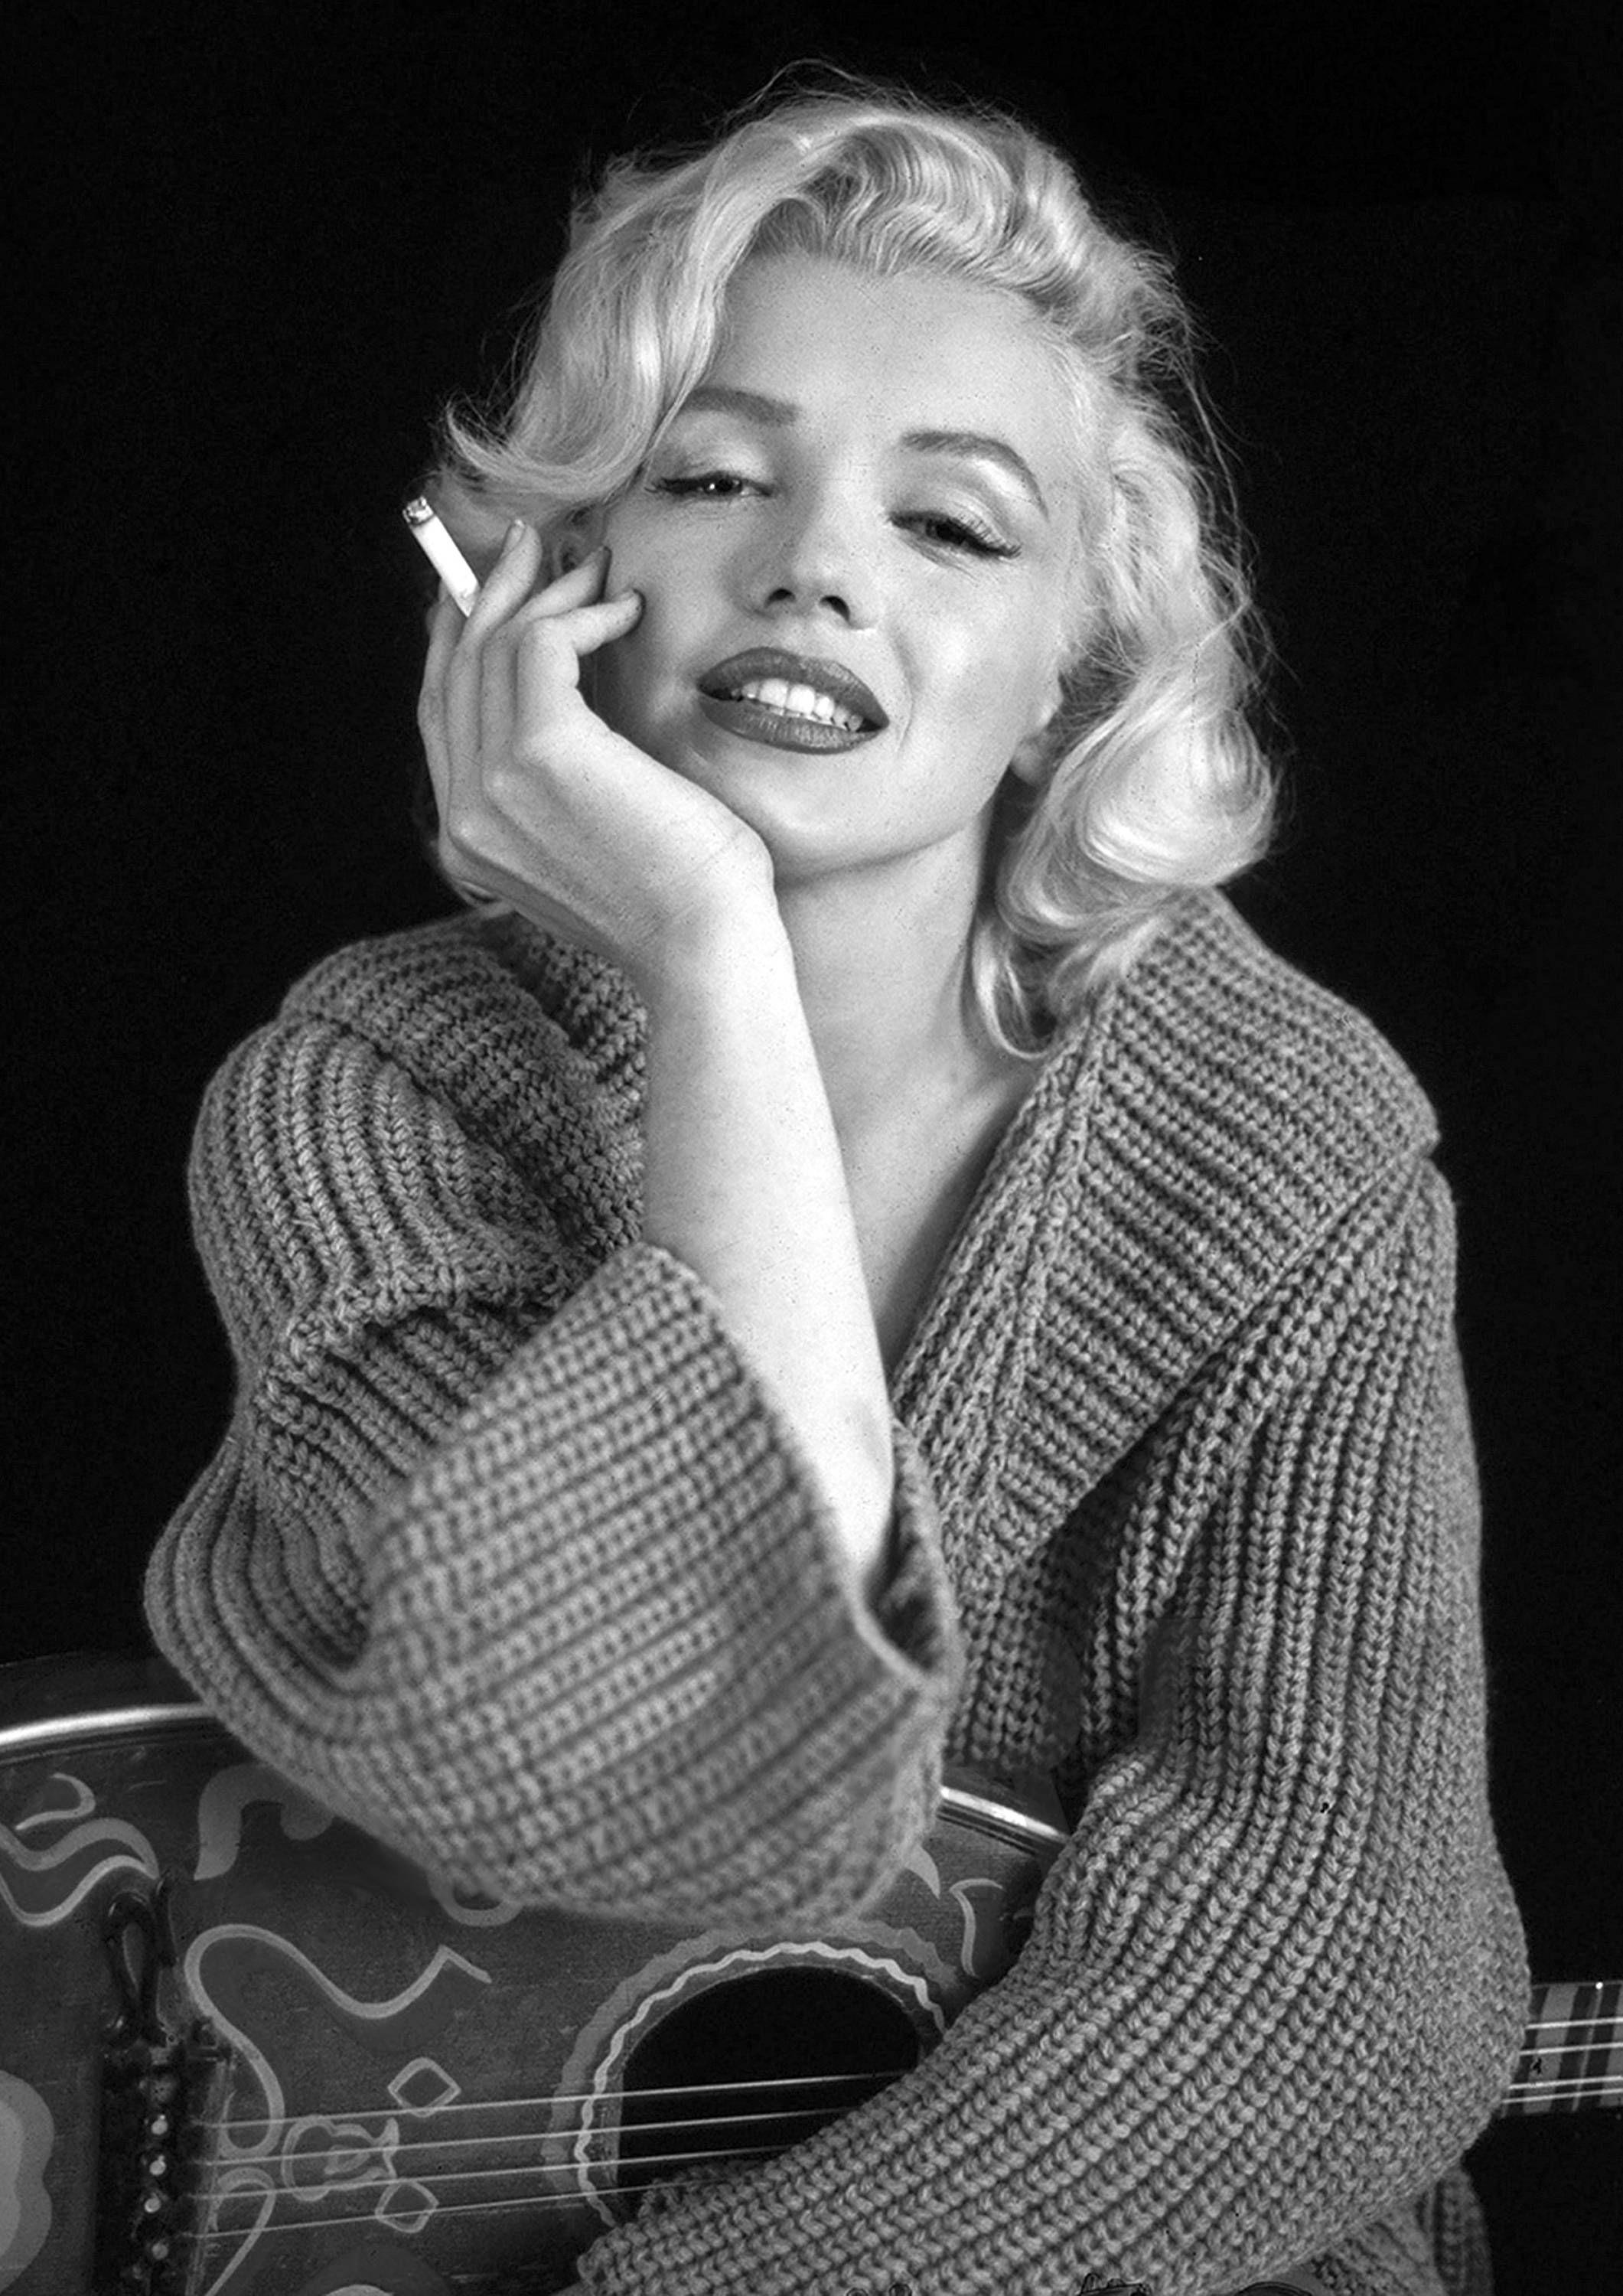 marilyn monroe with tattoos and smoking